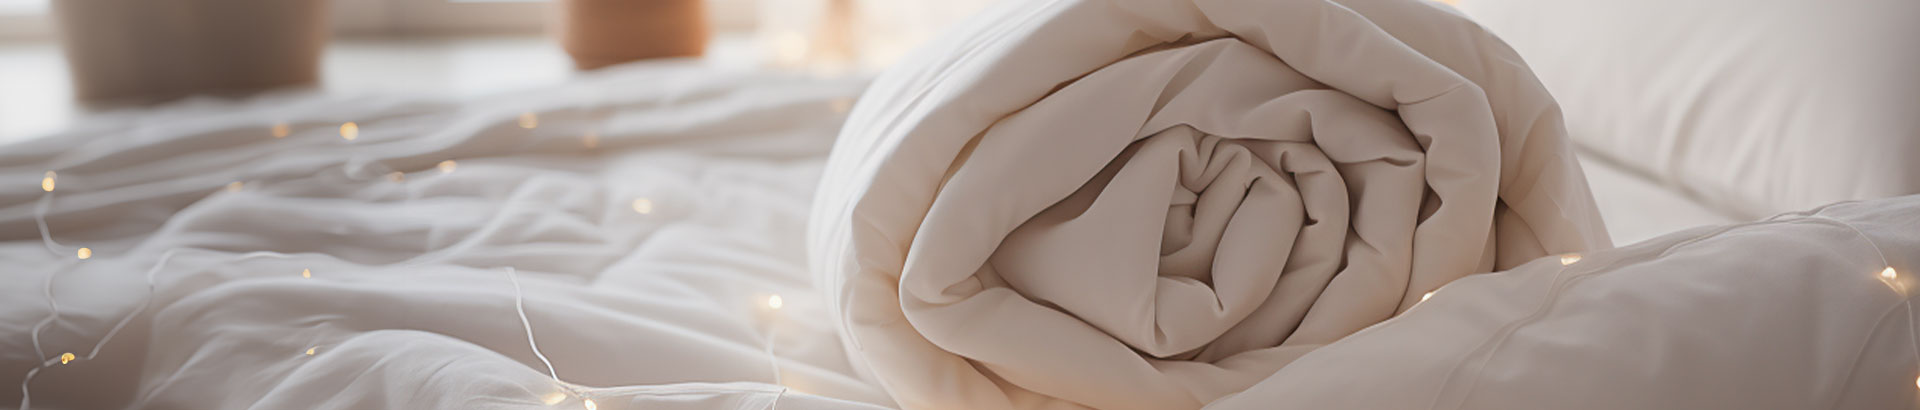 A duvet made with natural materials showcasing all the benefits of 100 british wool bedding.